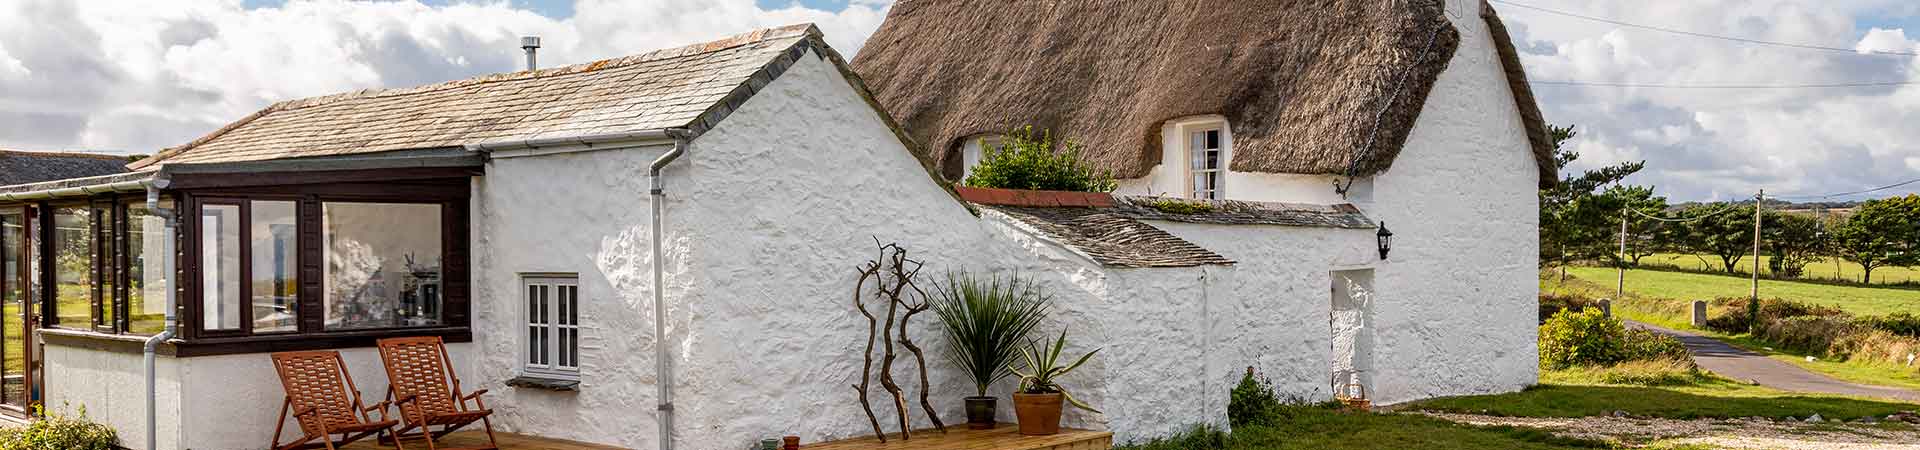 Thatched holiday cottages in East Devon